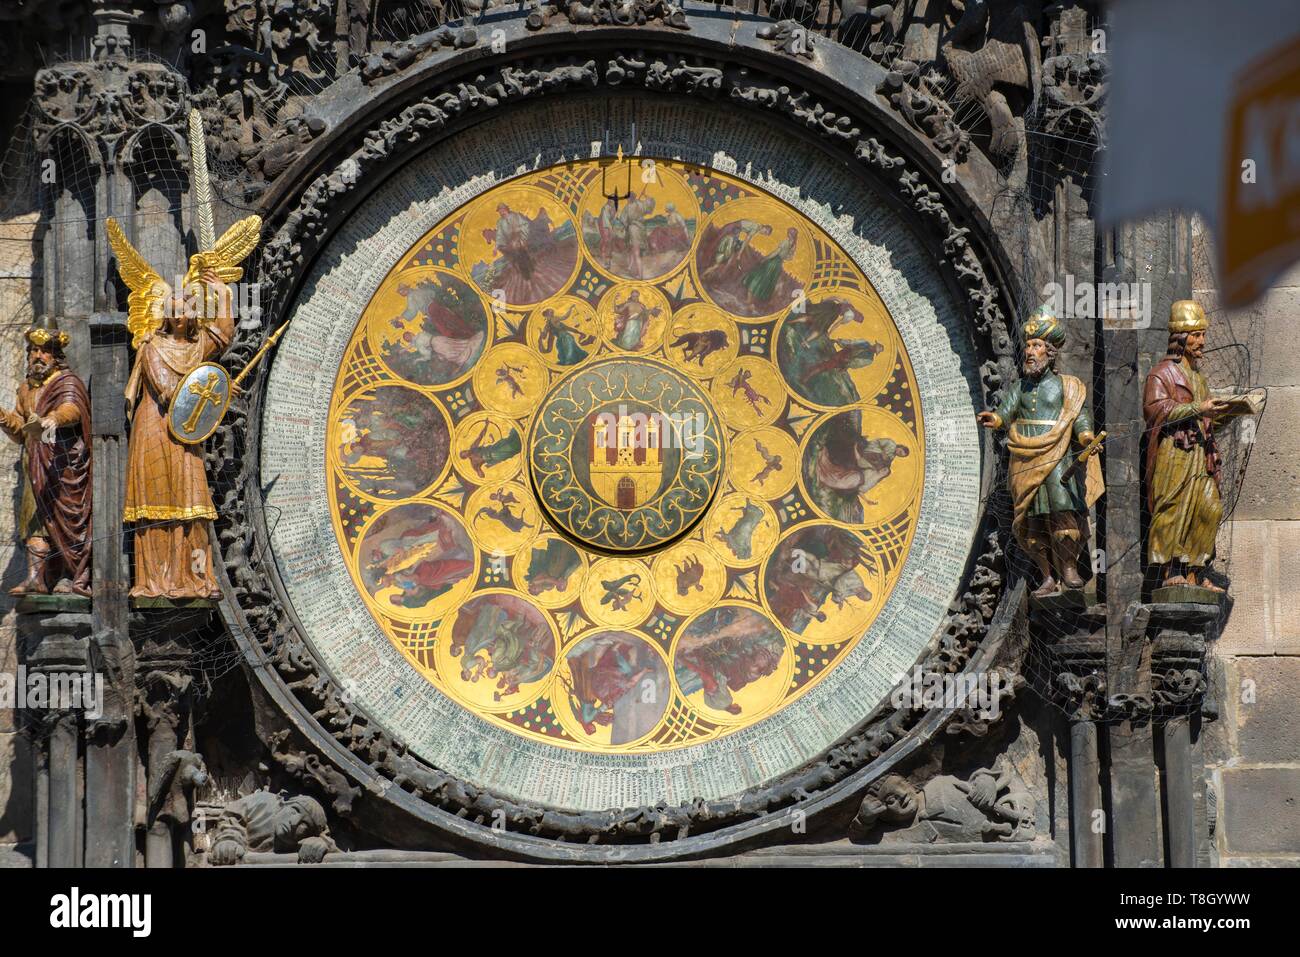 Czech Republic, Praha, listed as World Heritage by UNESCO, oldtown place, astronomic clock detail Stock Photo